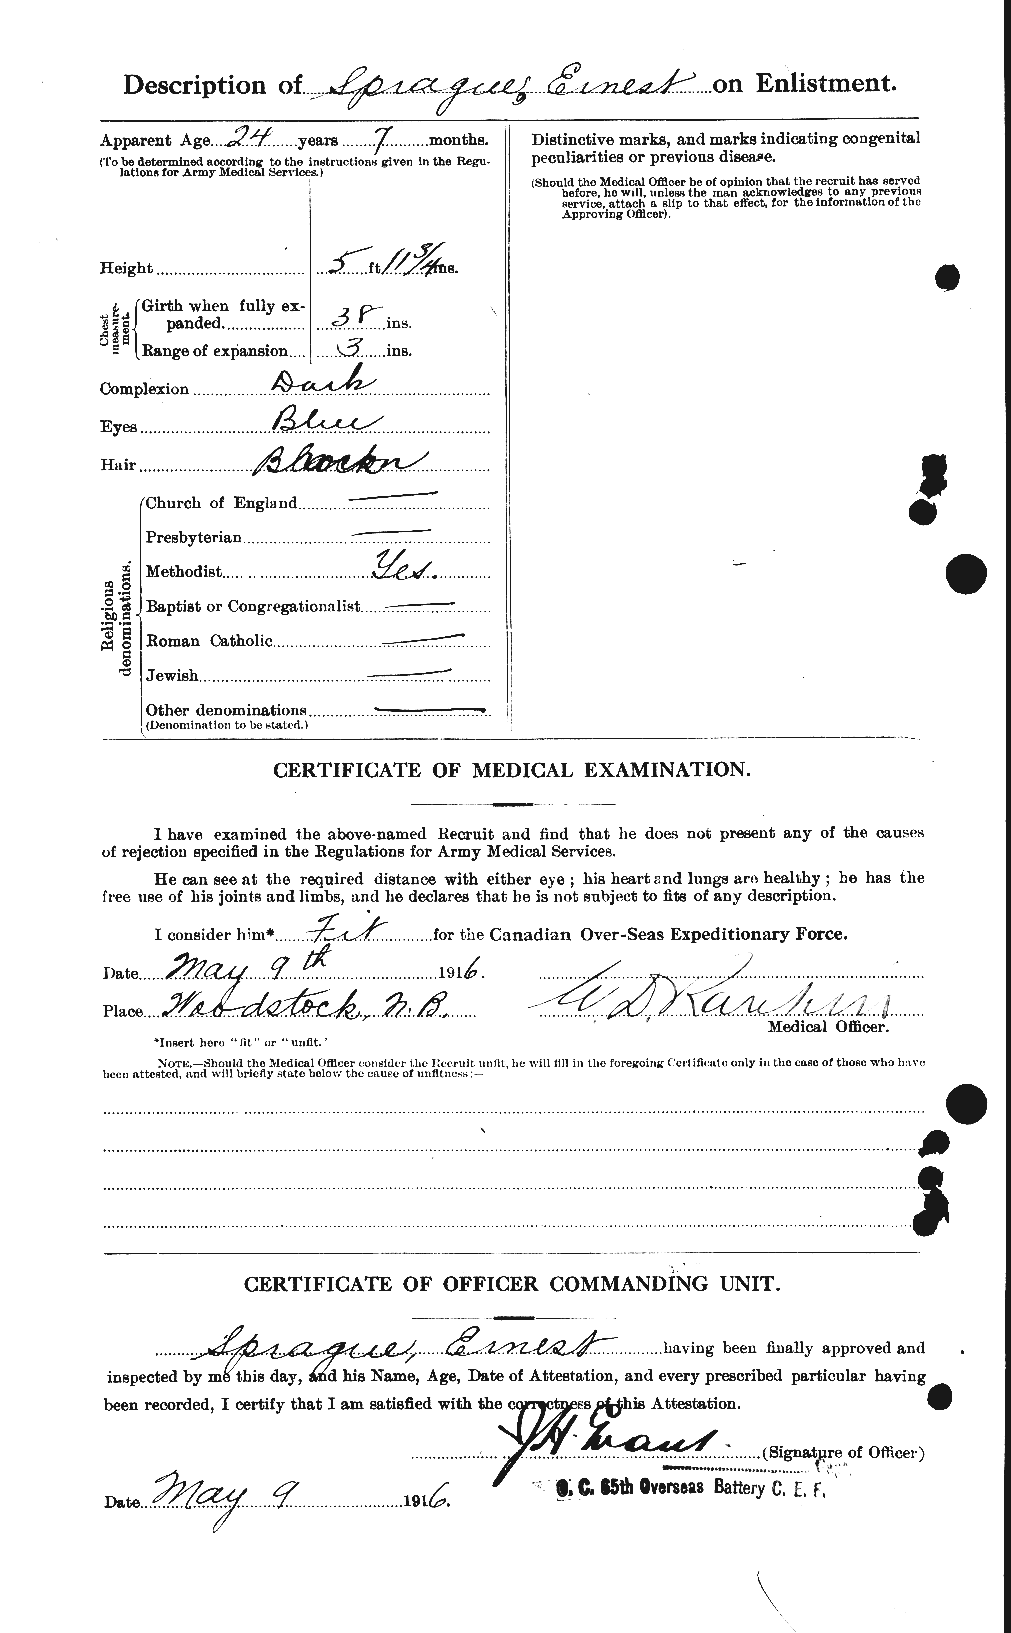 Personnel Records of the First World War - CEF 113139b